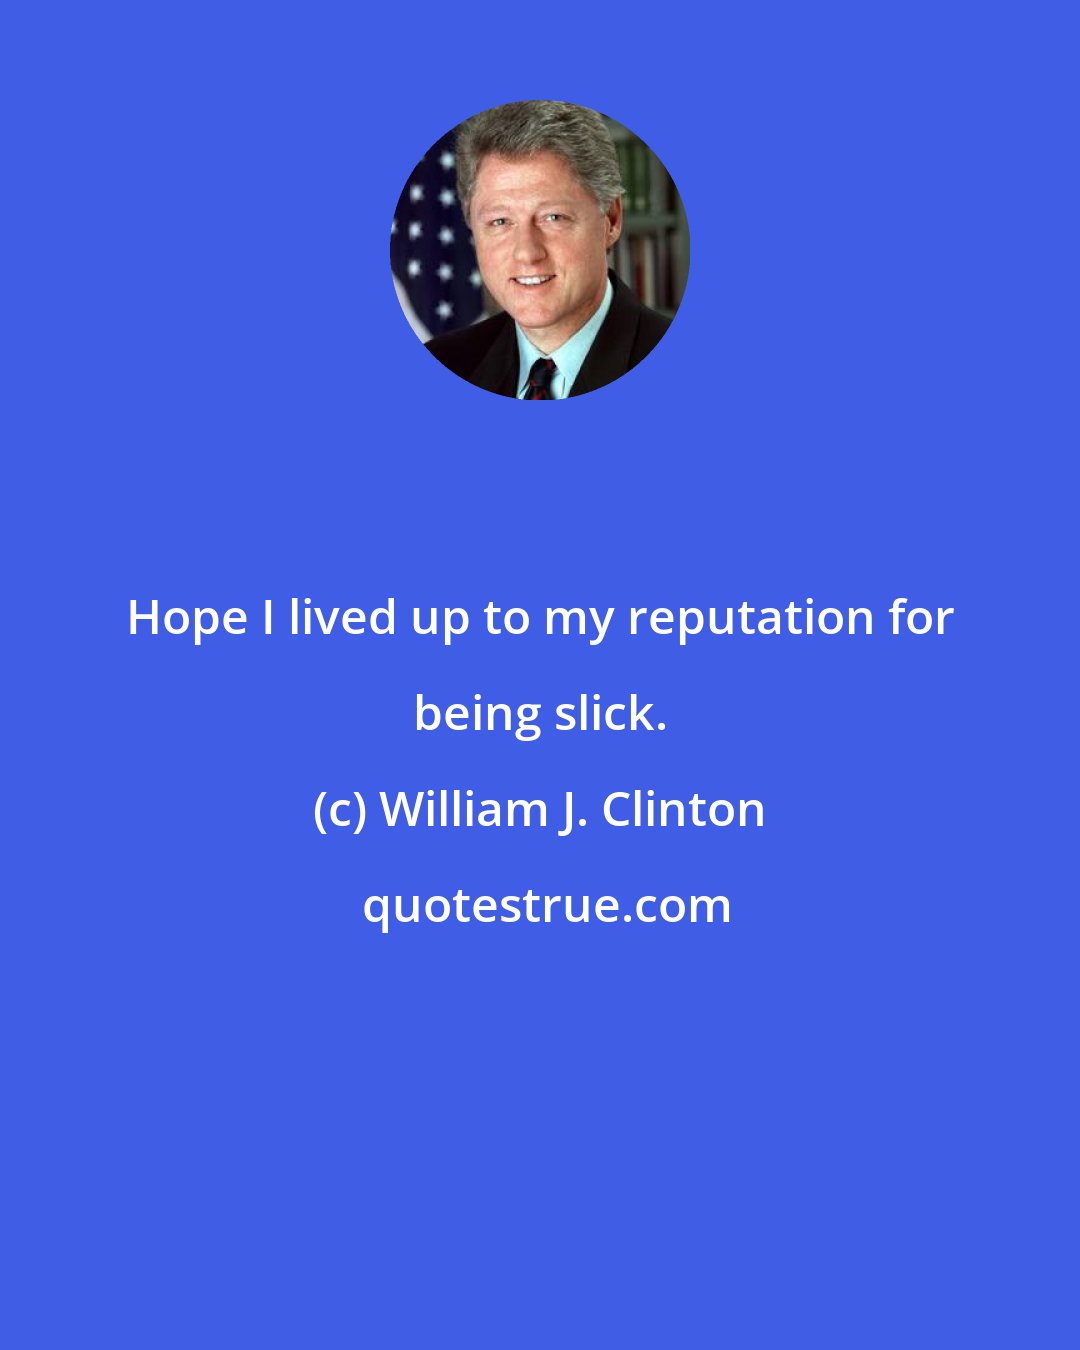 William J. Clinton: Hope I lived up to my reputation for being slick.